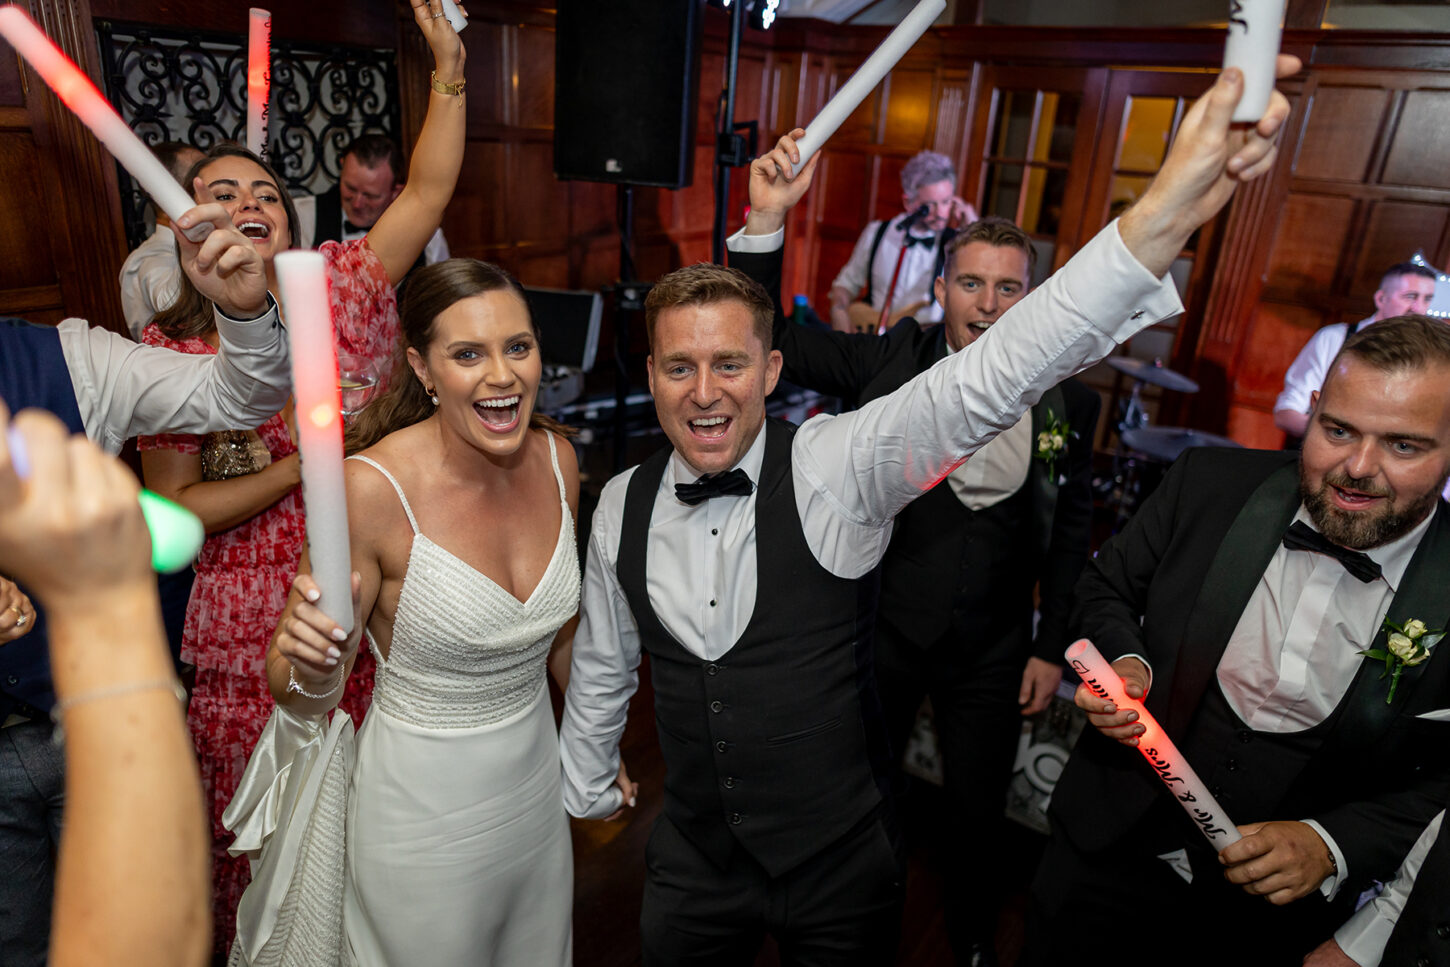 Bride and groom partying the night away surrounded by friends and family at Dromquinna Manor, Kenmare.